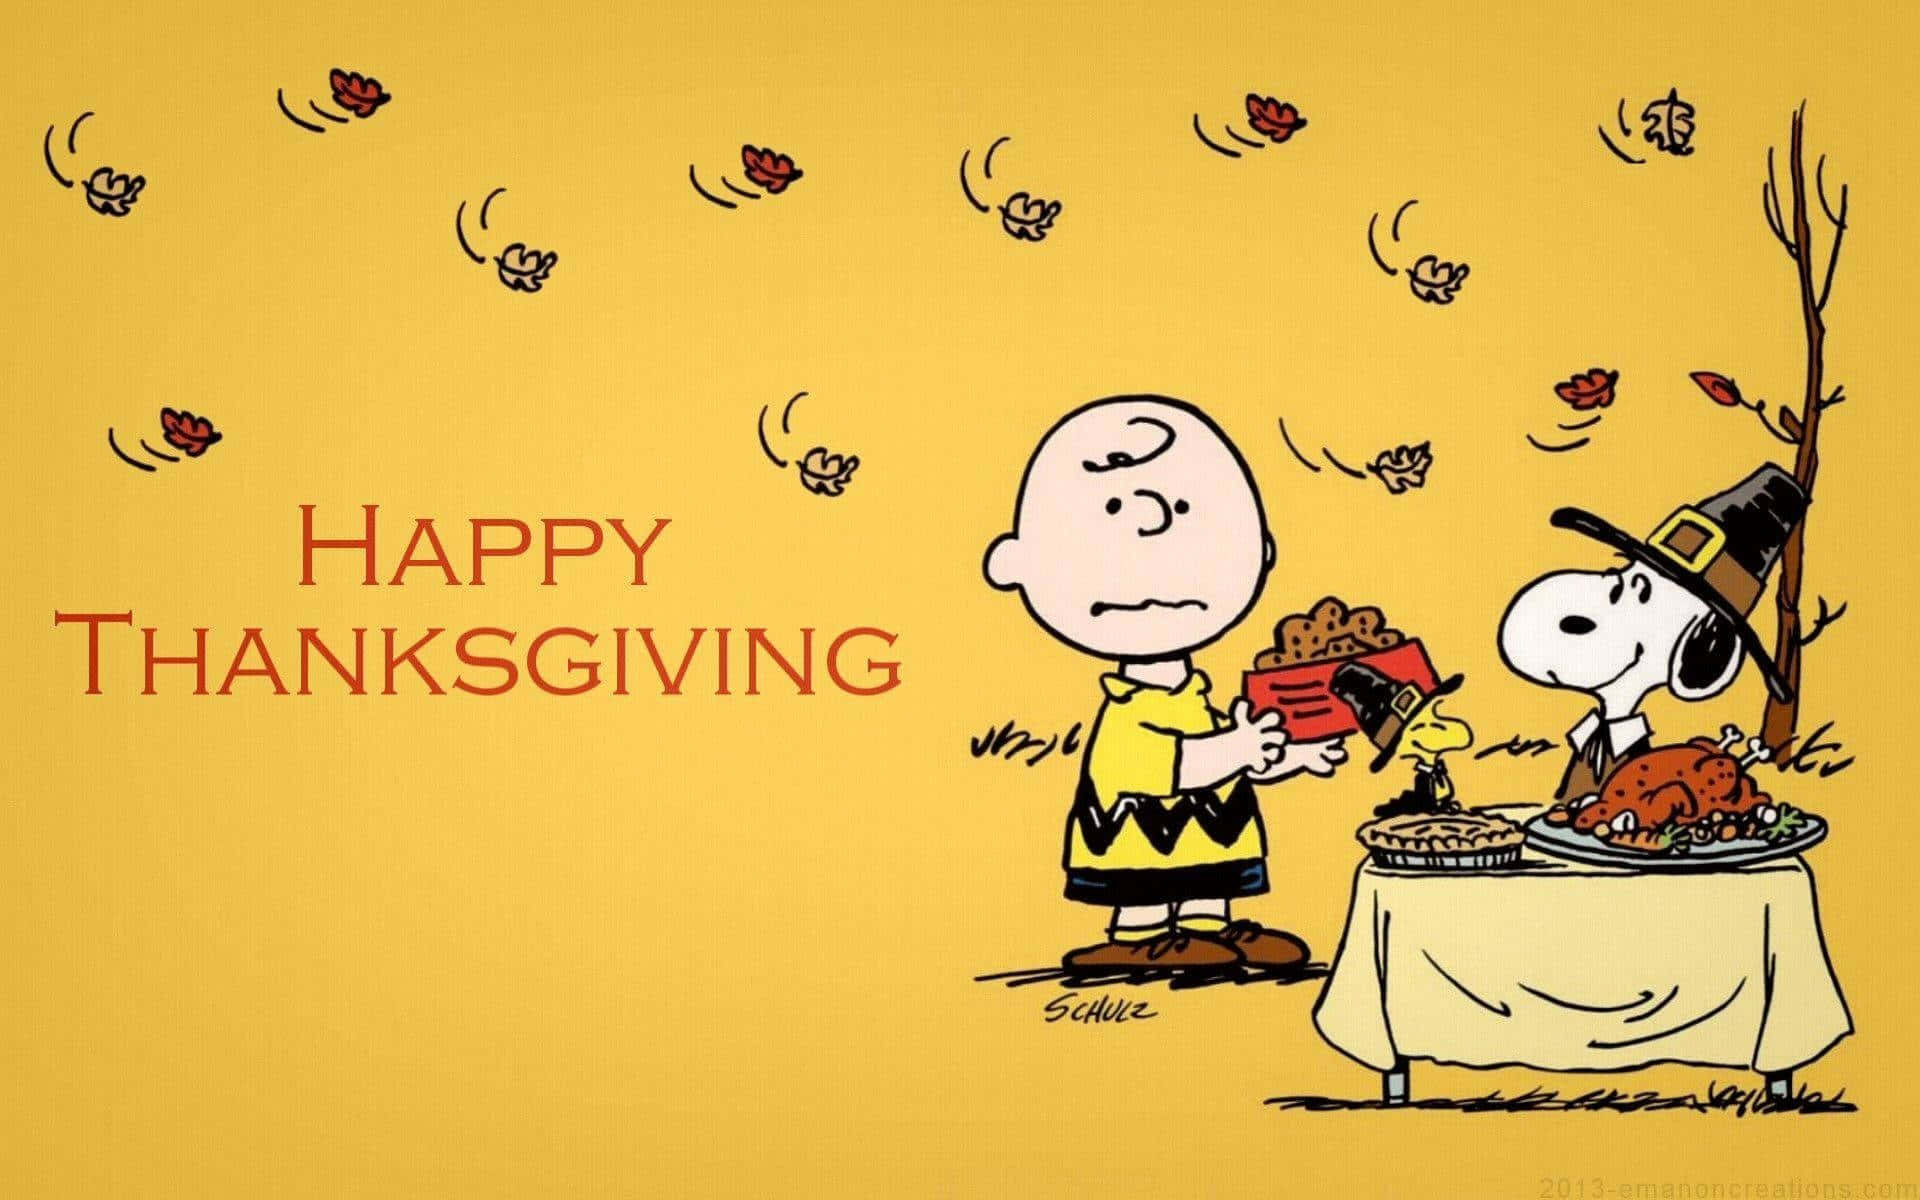 Celebrate a beautiful Thanksgiving with family and friends! Wallpaper